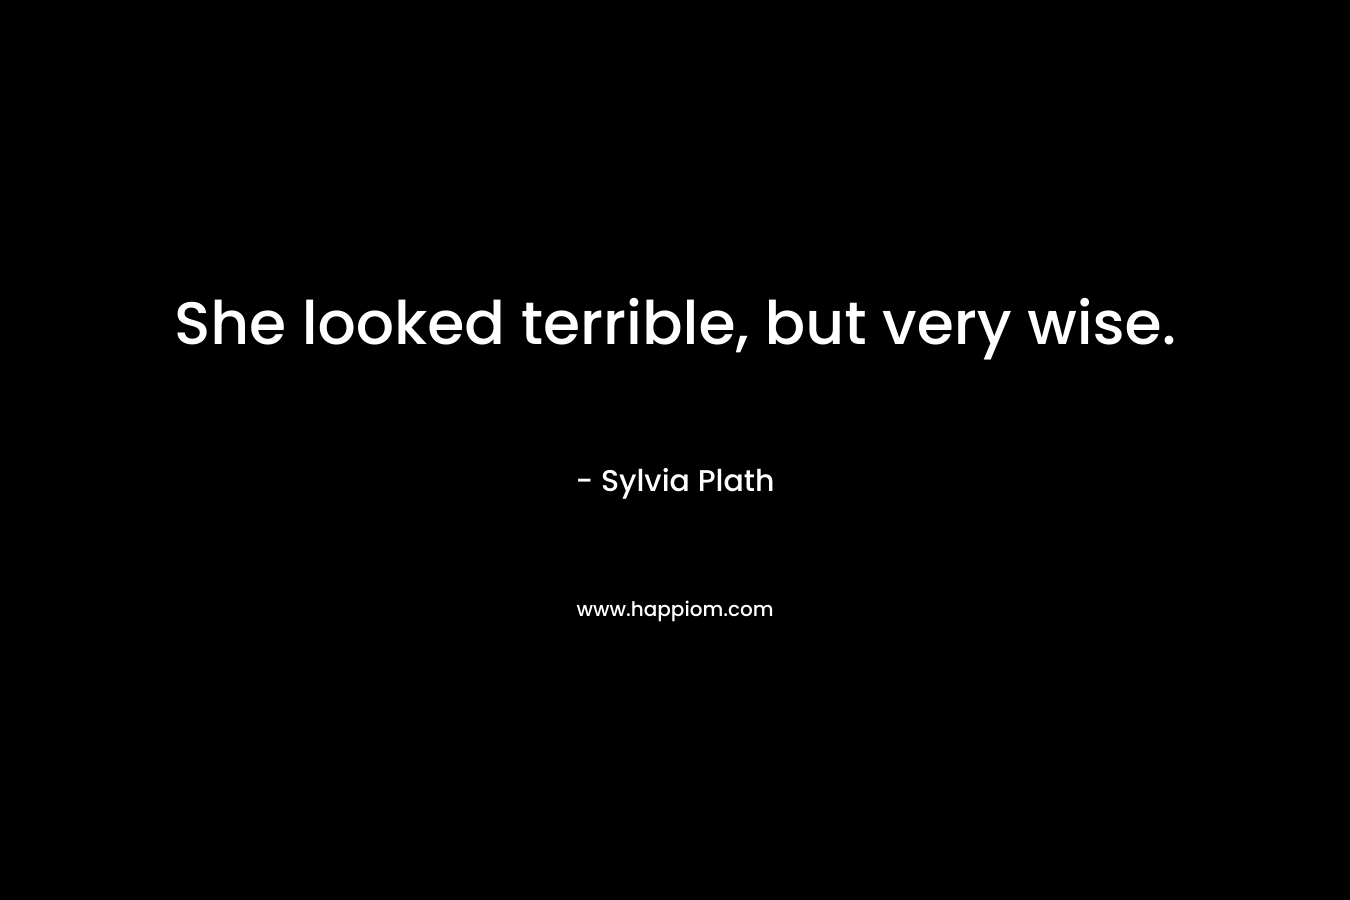 She looked terrible, but very wise. – Sylvia Plath